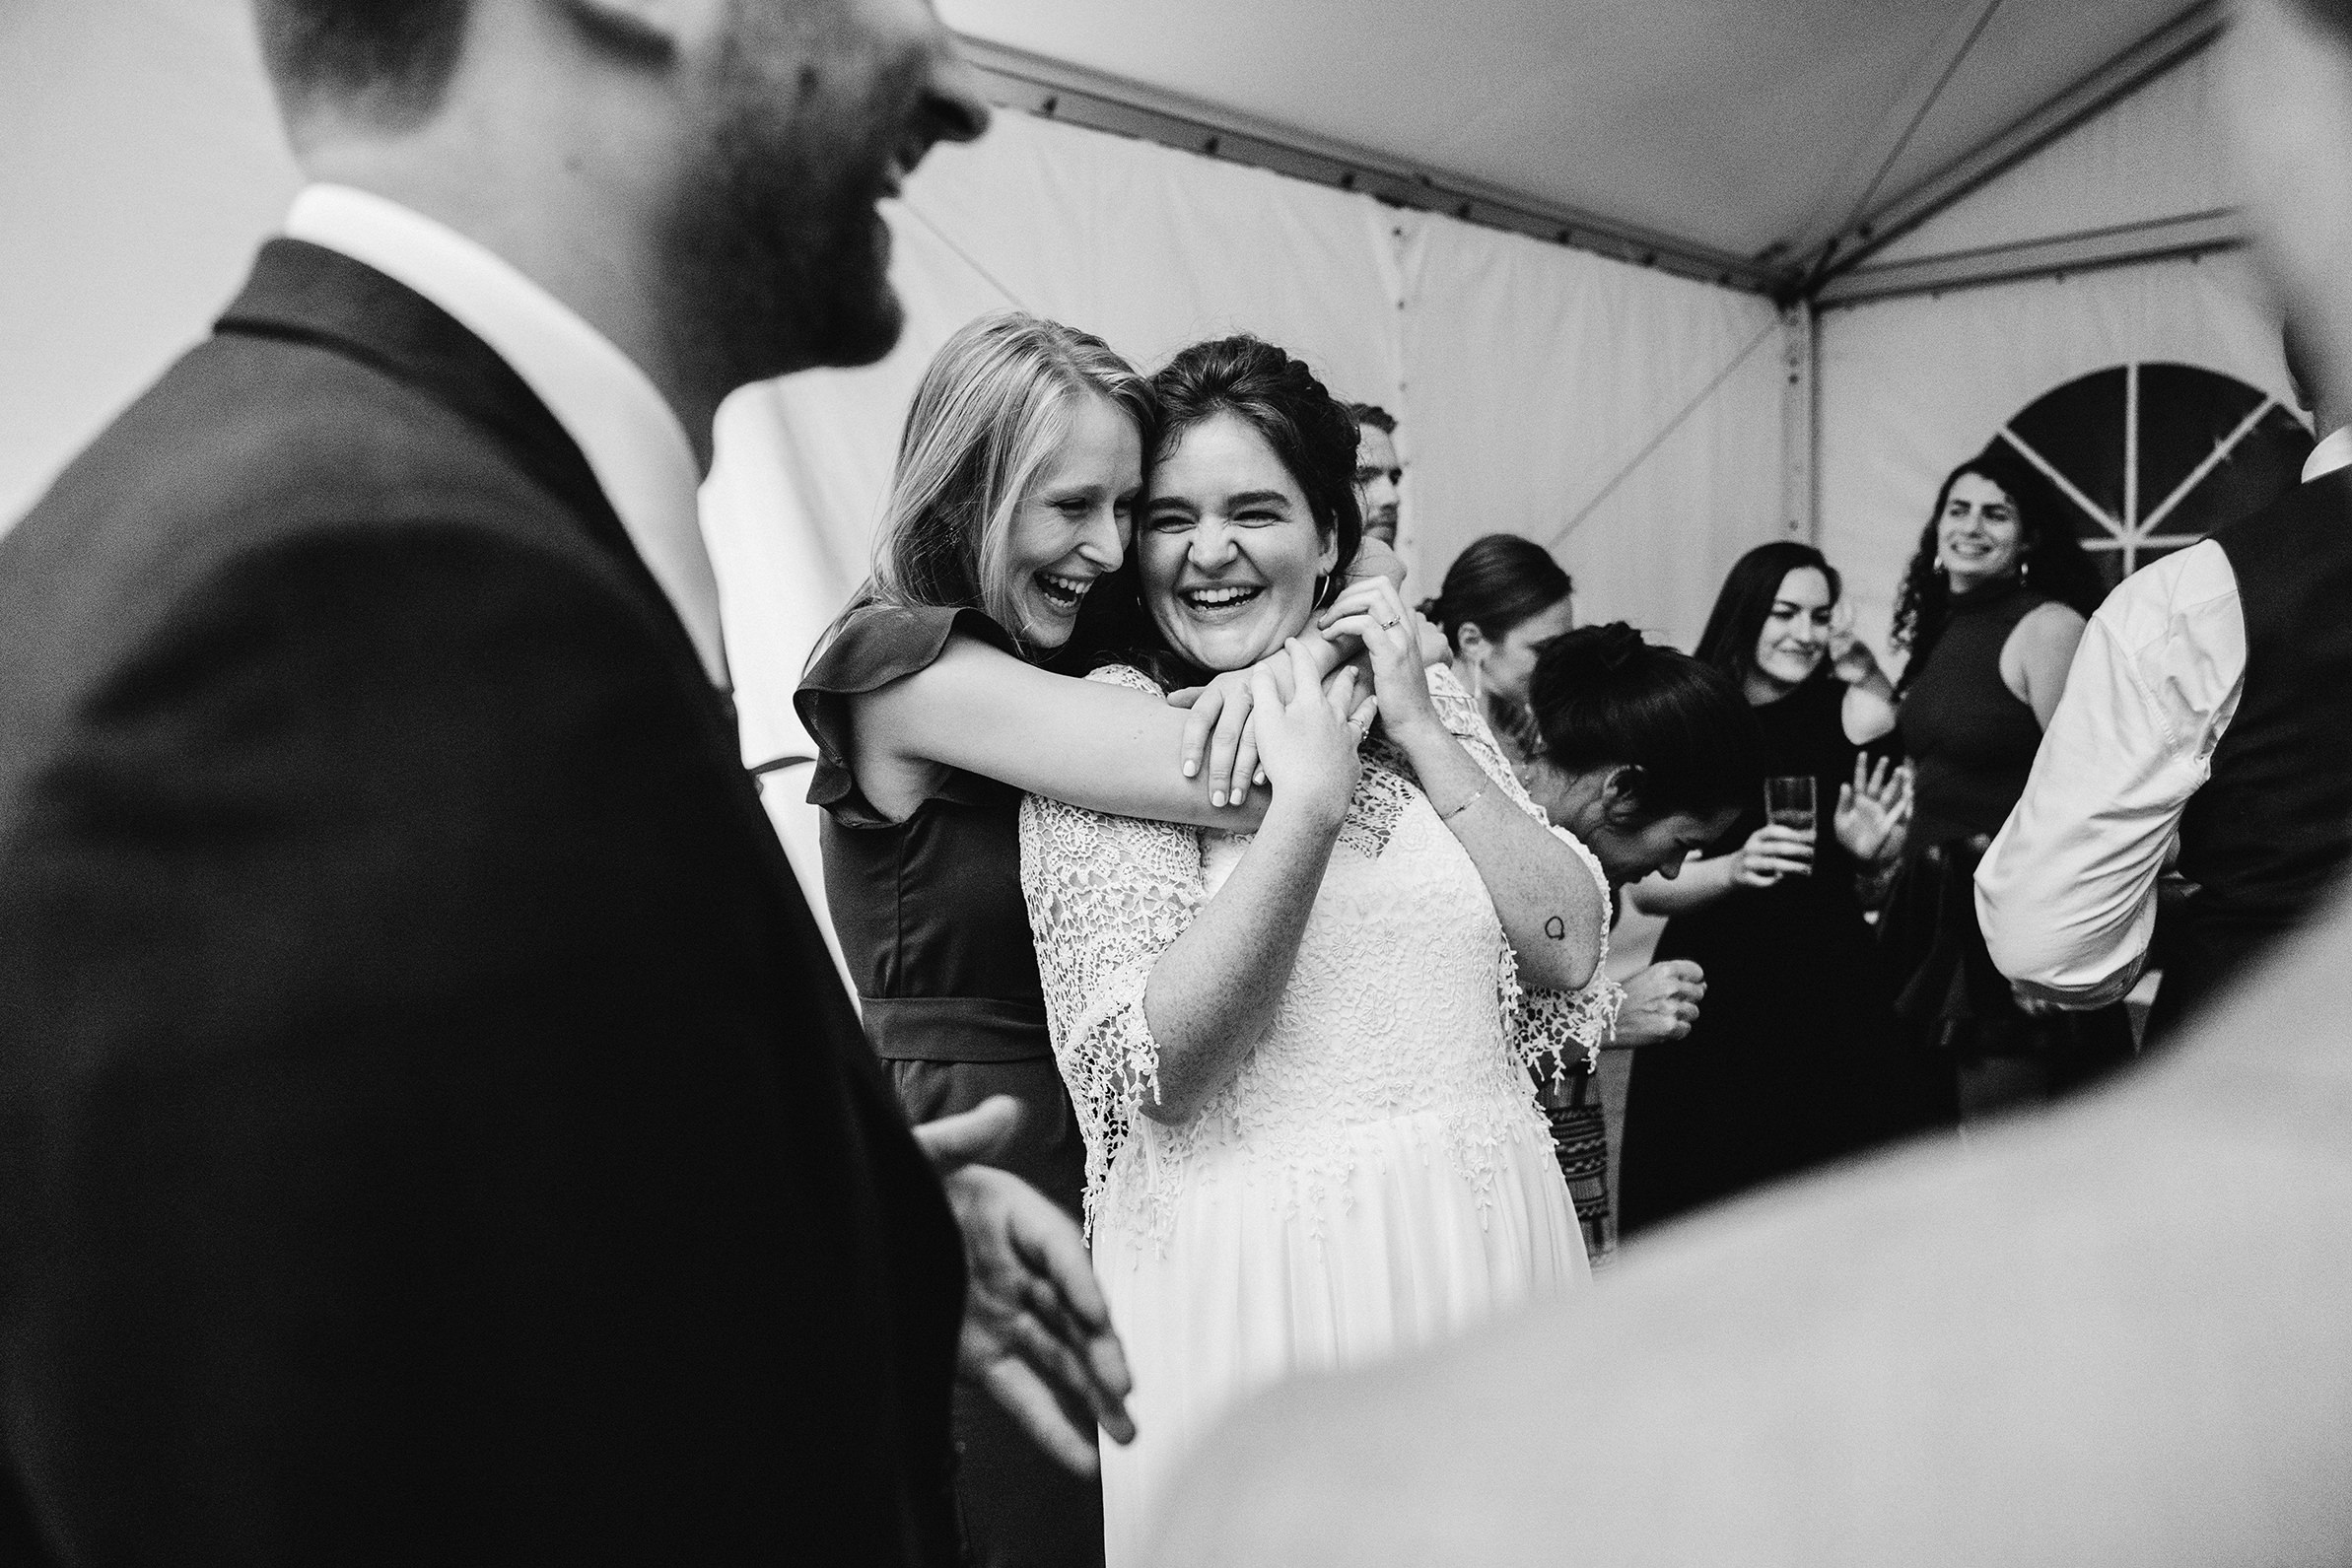 A documentary photograph featured in the best of wedding photography of 2019 showing a bride dancing with her friends